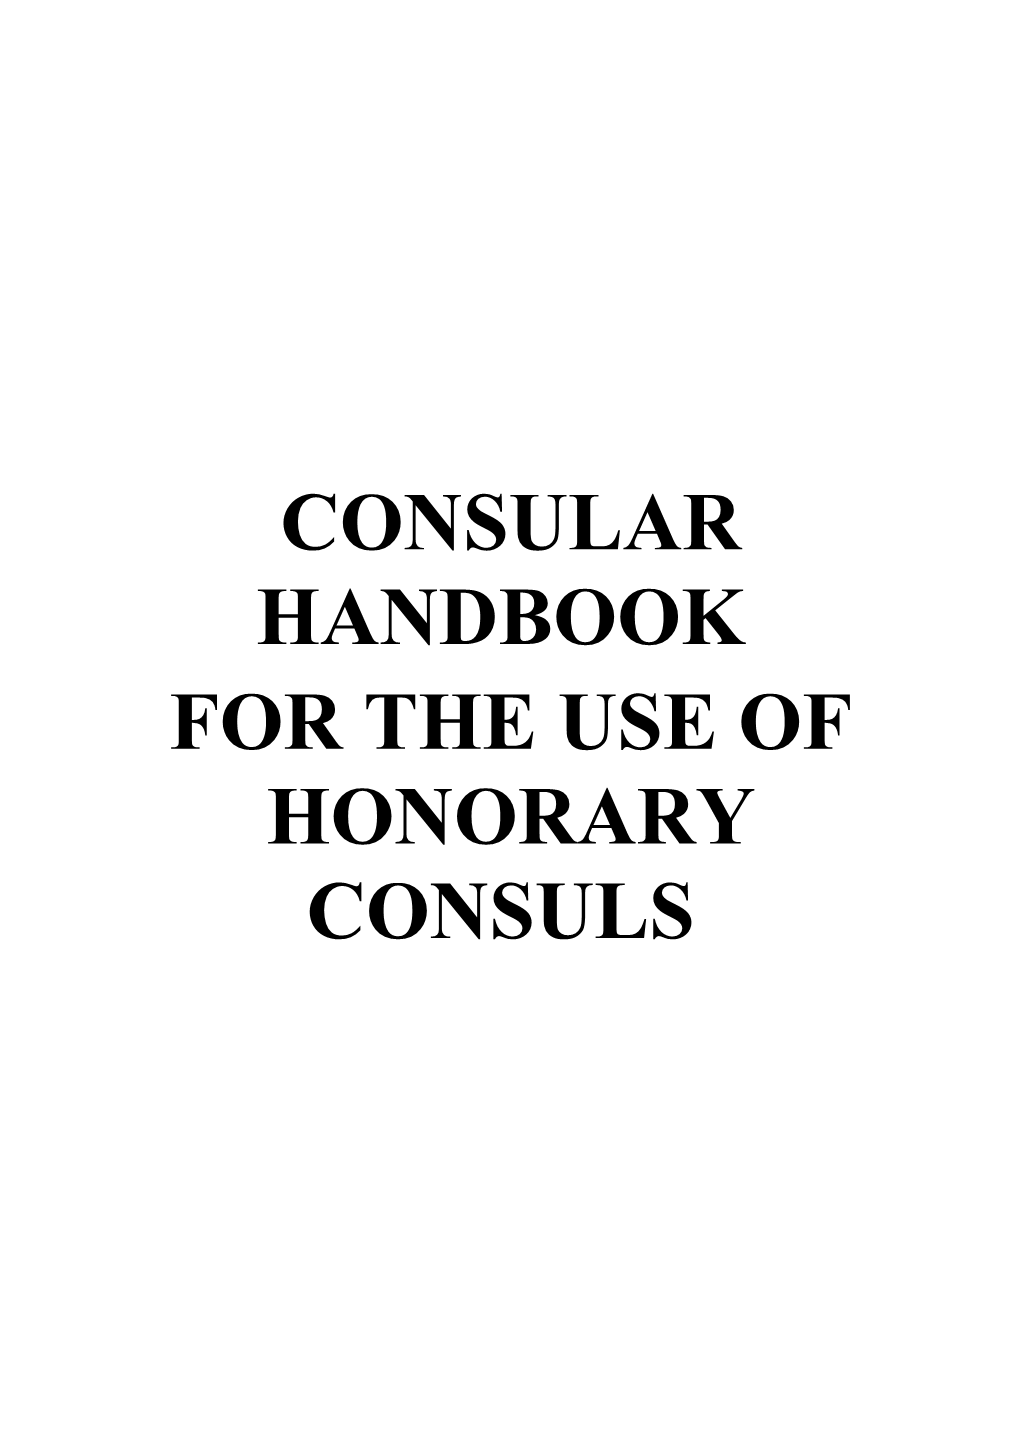 For the Use of Honorary CONSULS